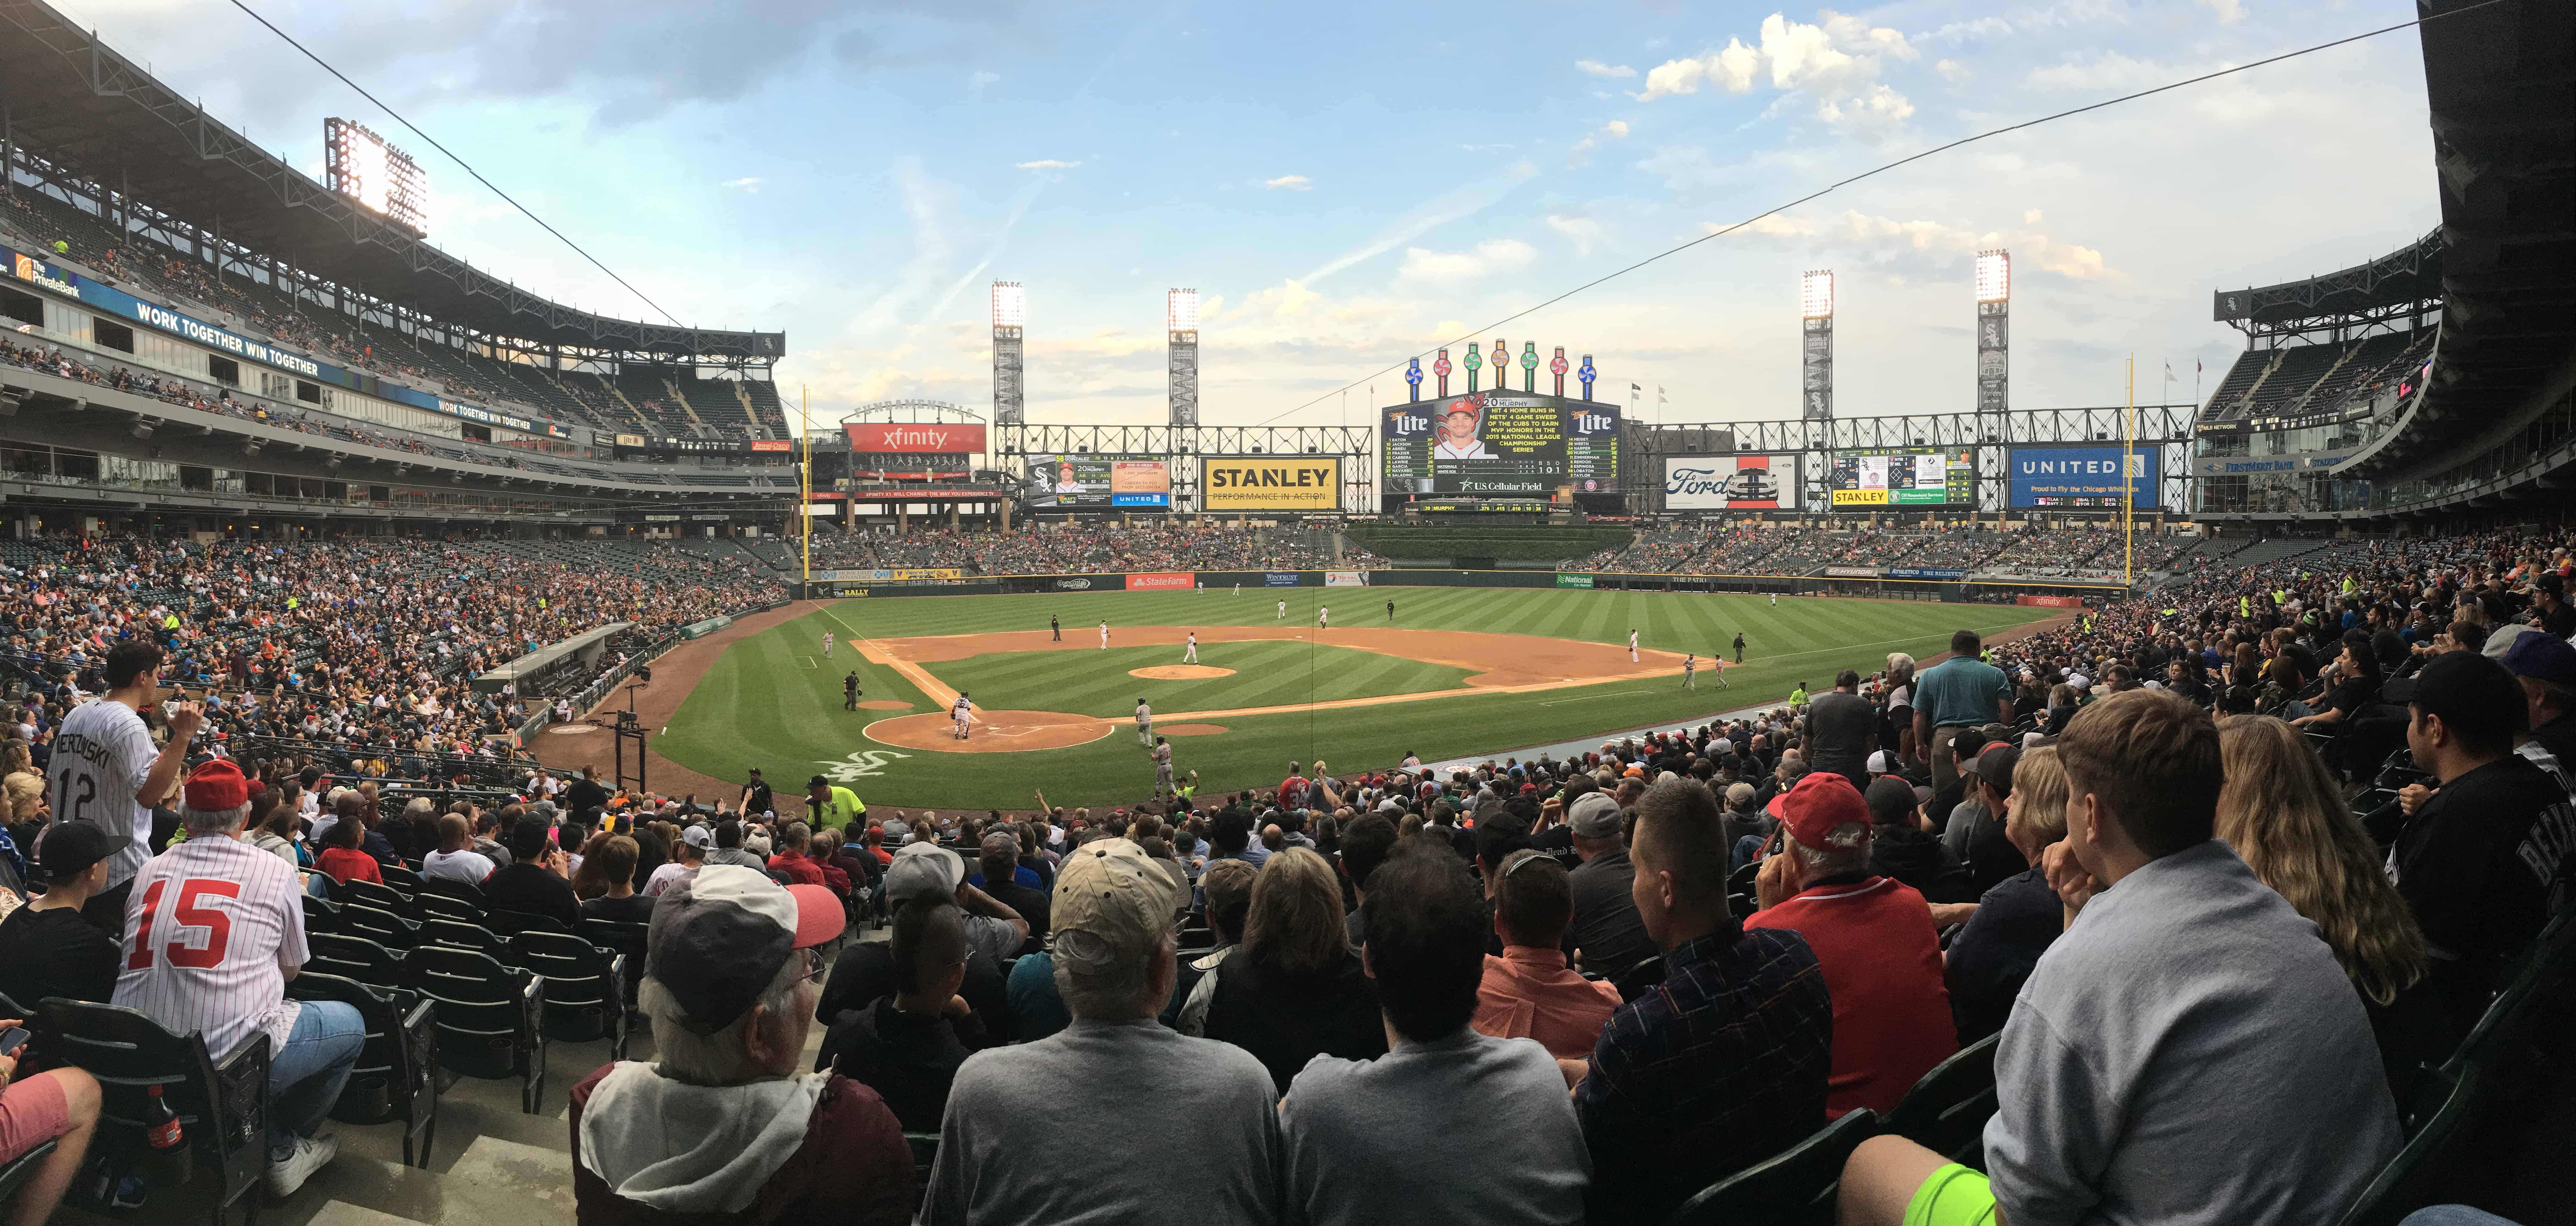 US Cellular Field in 2016 in Chicago, Illinois